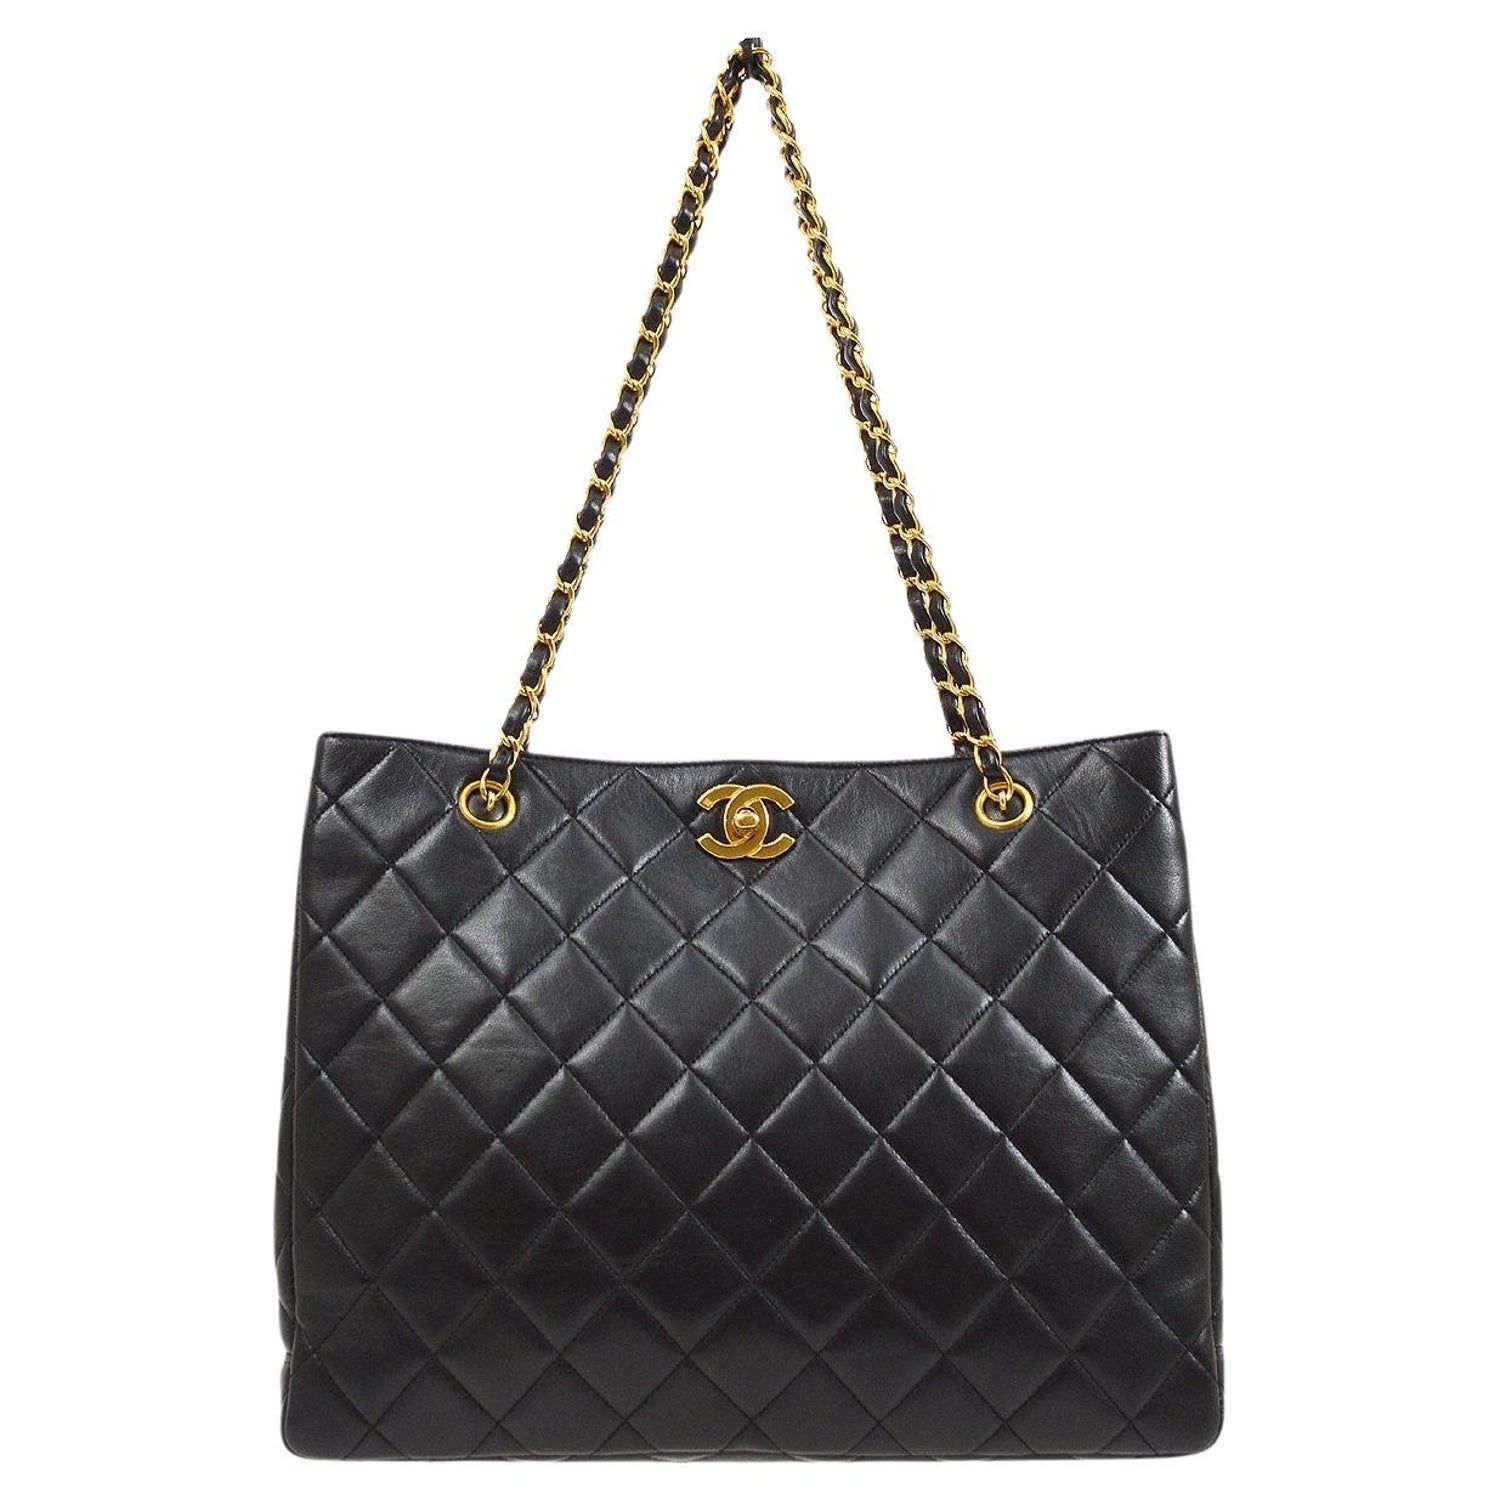 chanel bags black and gold